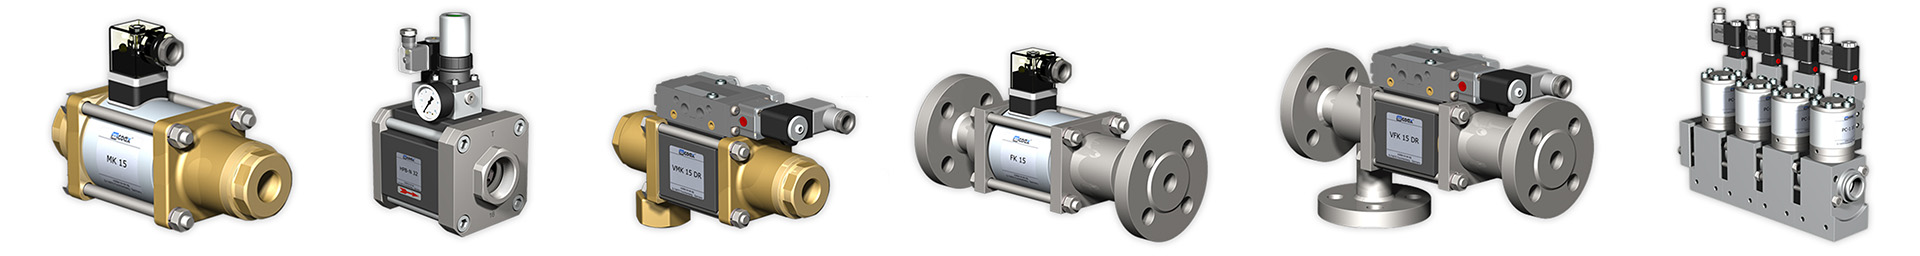 co-ax valves inc. – your valve solution provider